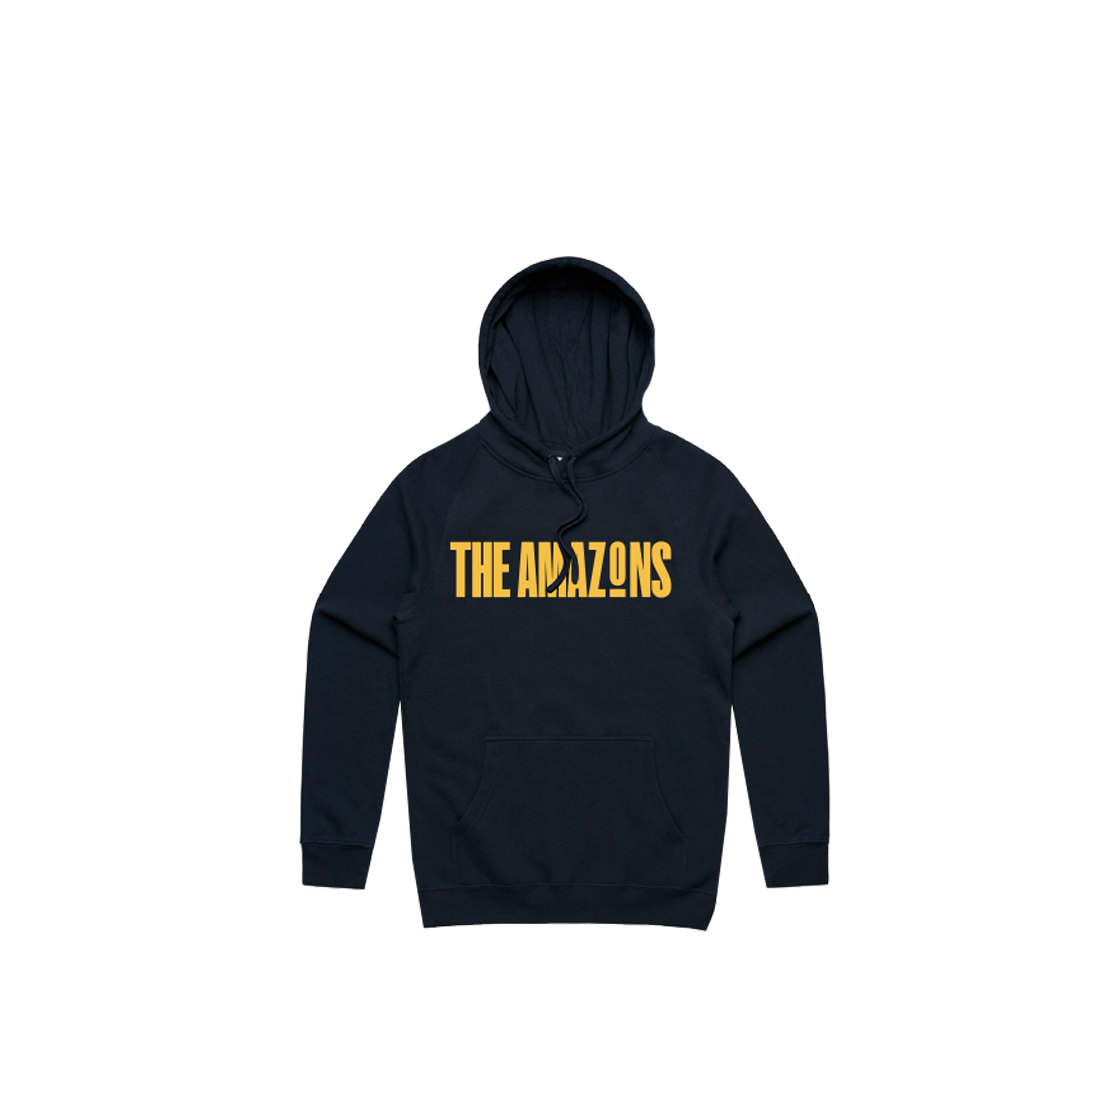 The Amazons - Navy Logo Hoodie The Amazons